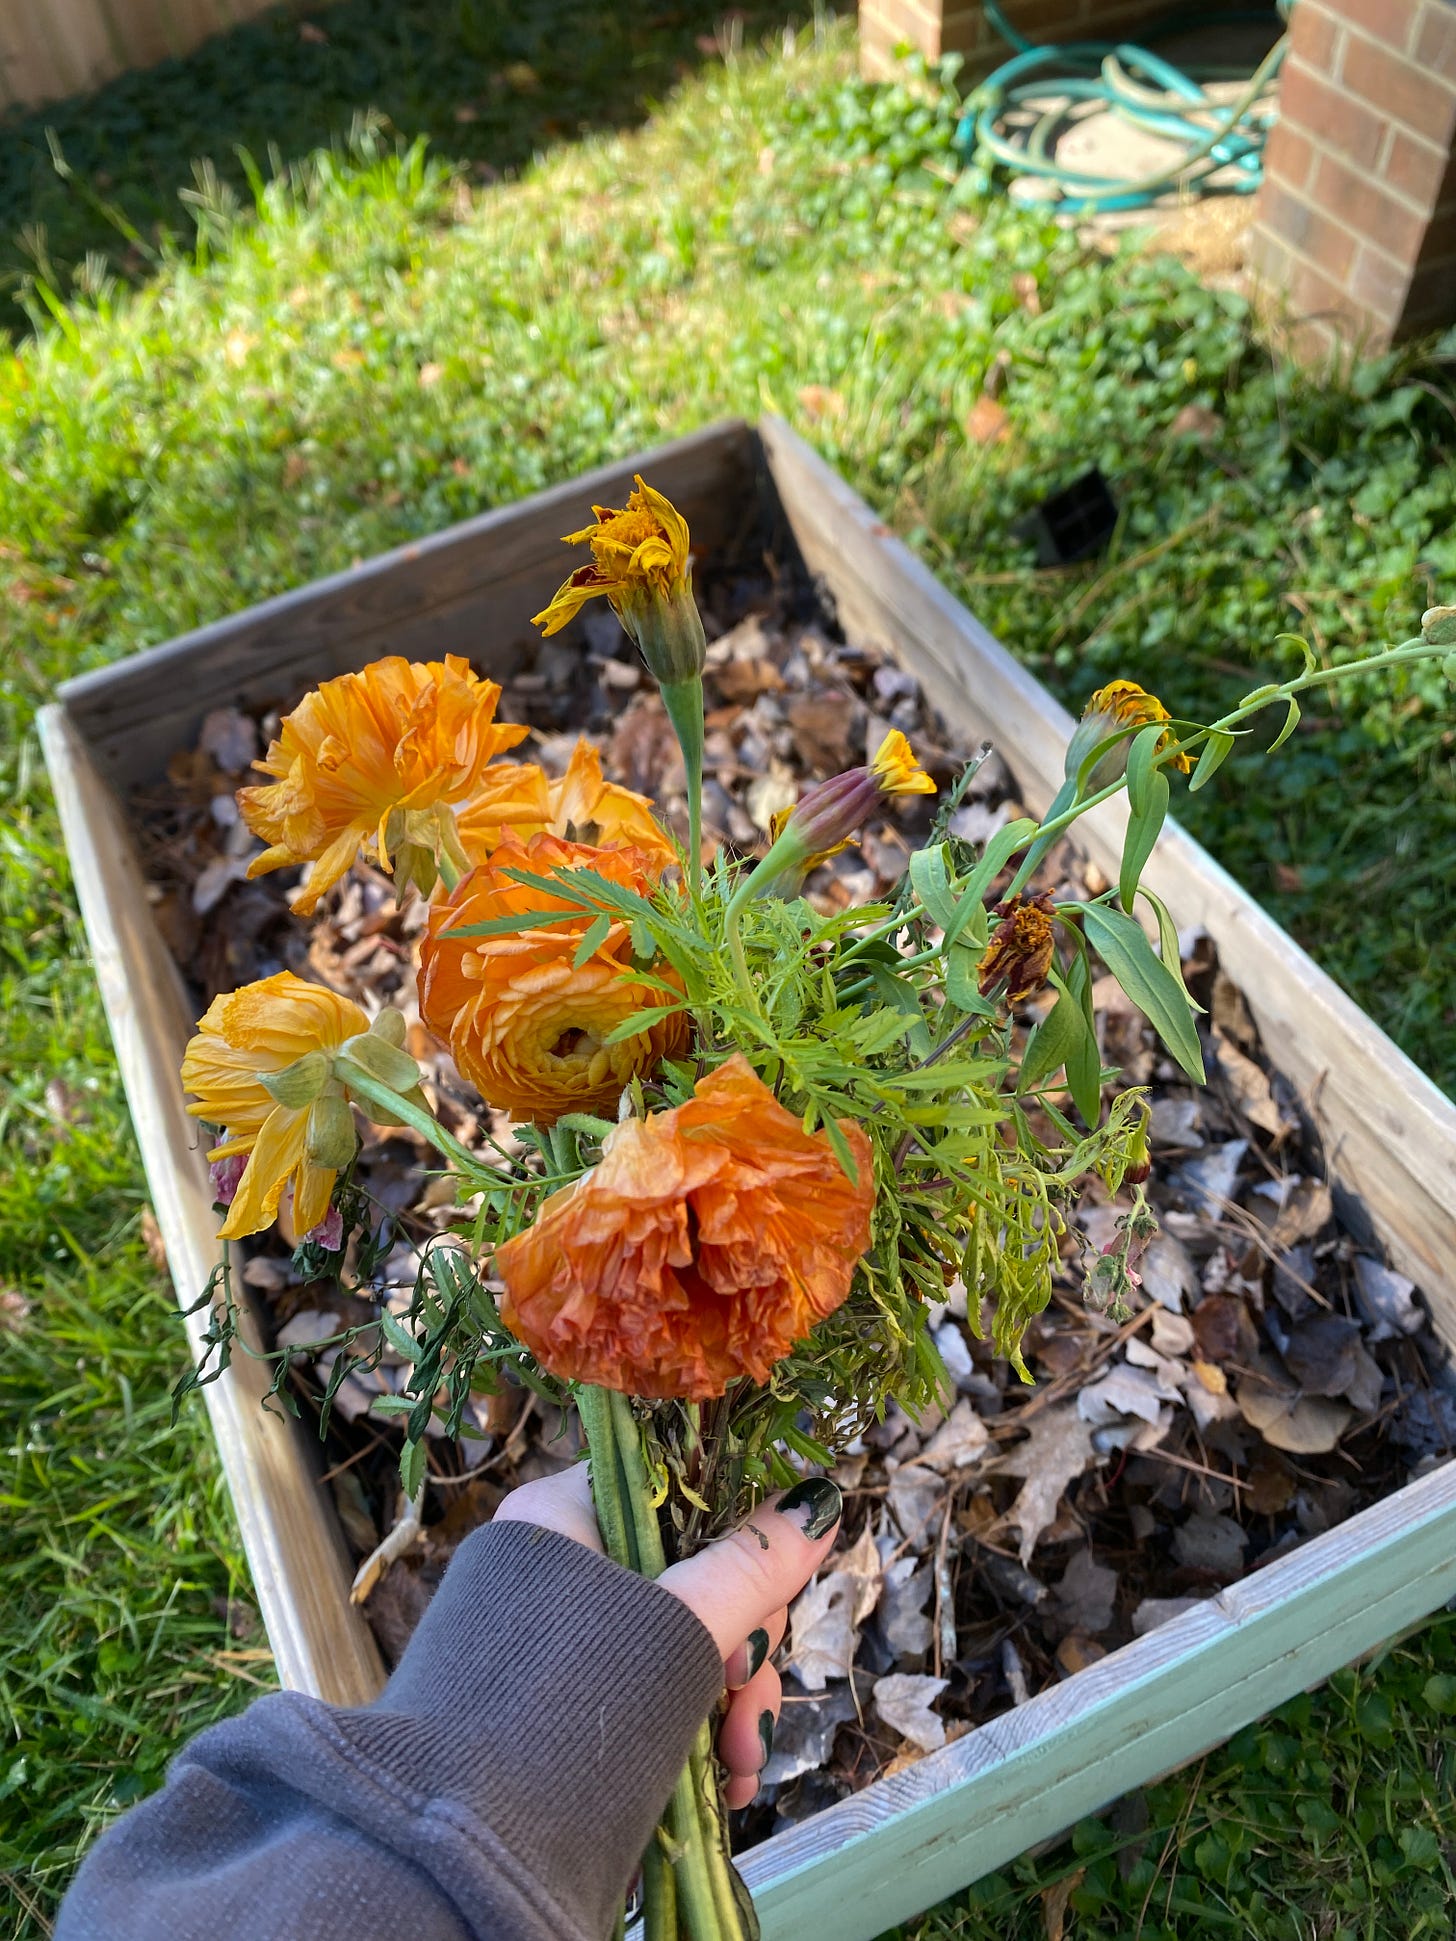 A person holding a boquet of orange and green flowers over a wooden raised garden bed which is filled with fallen leaves